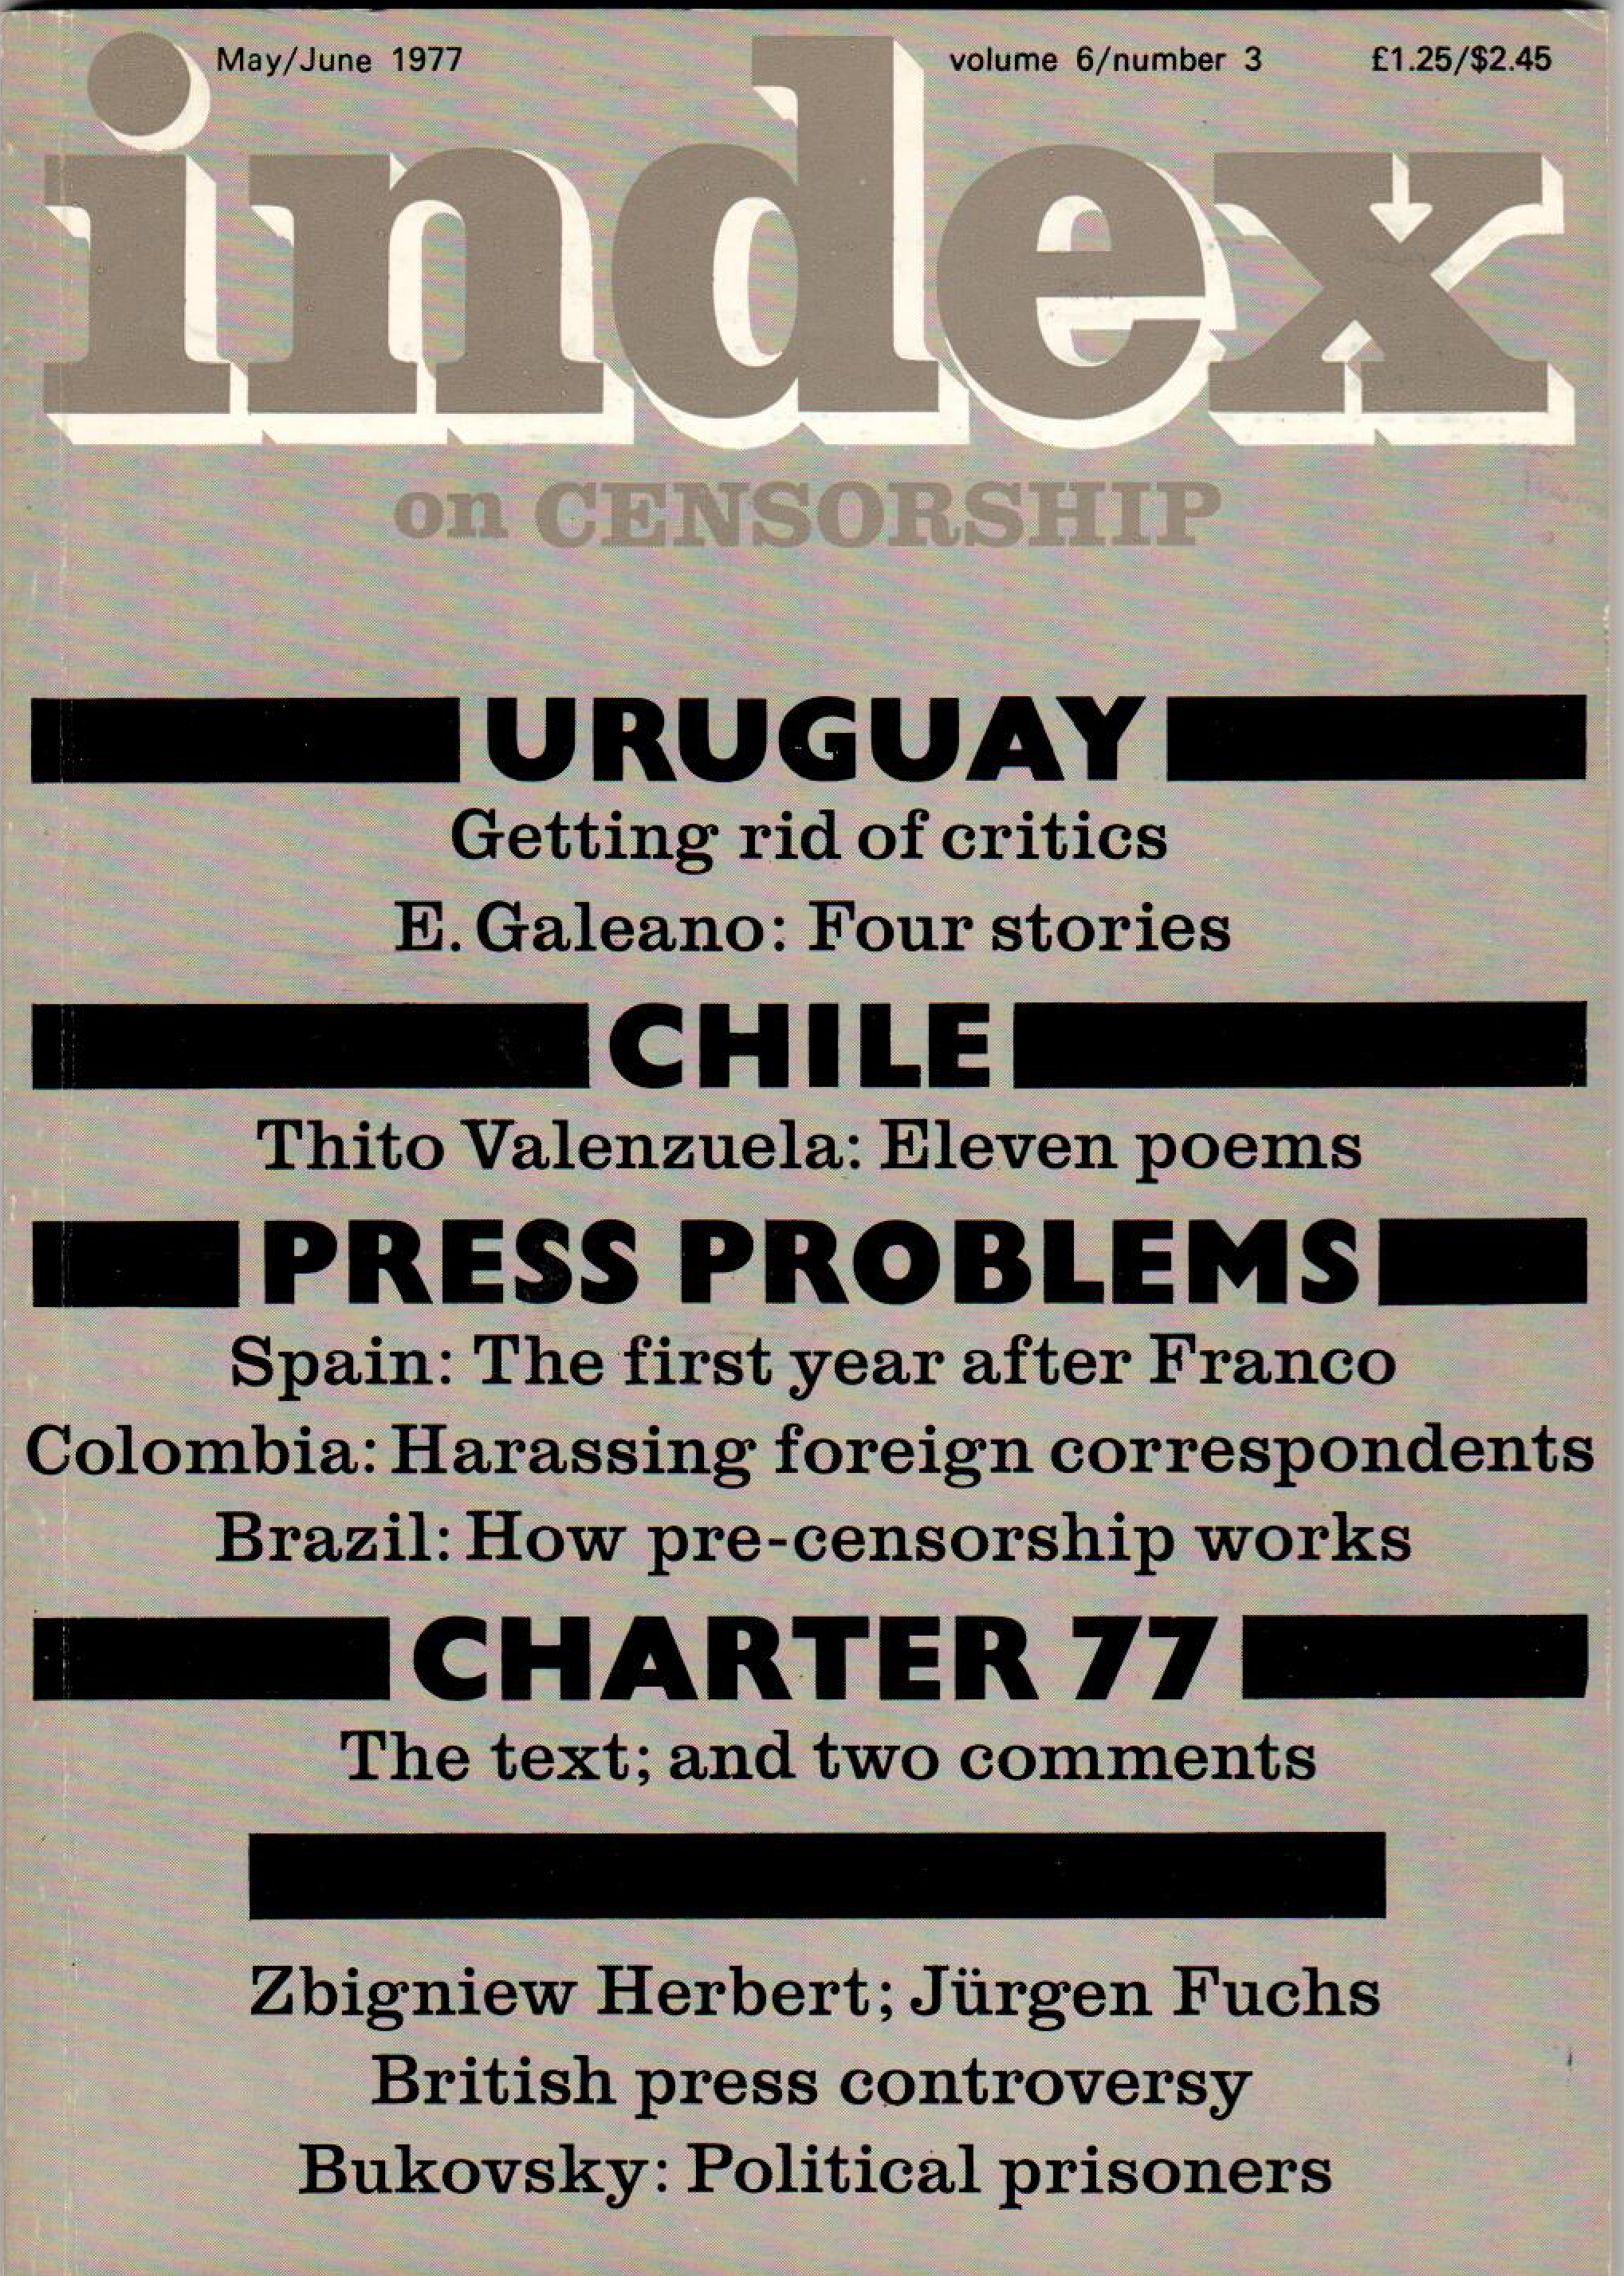 Uruguay: Getting rid of critics, the May 1977 issue of Index on Censorship magazine